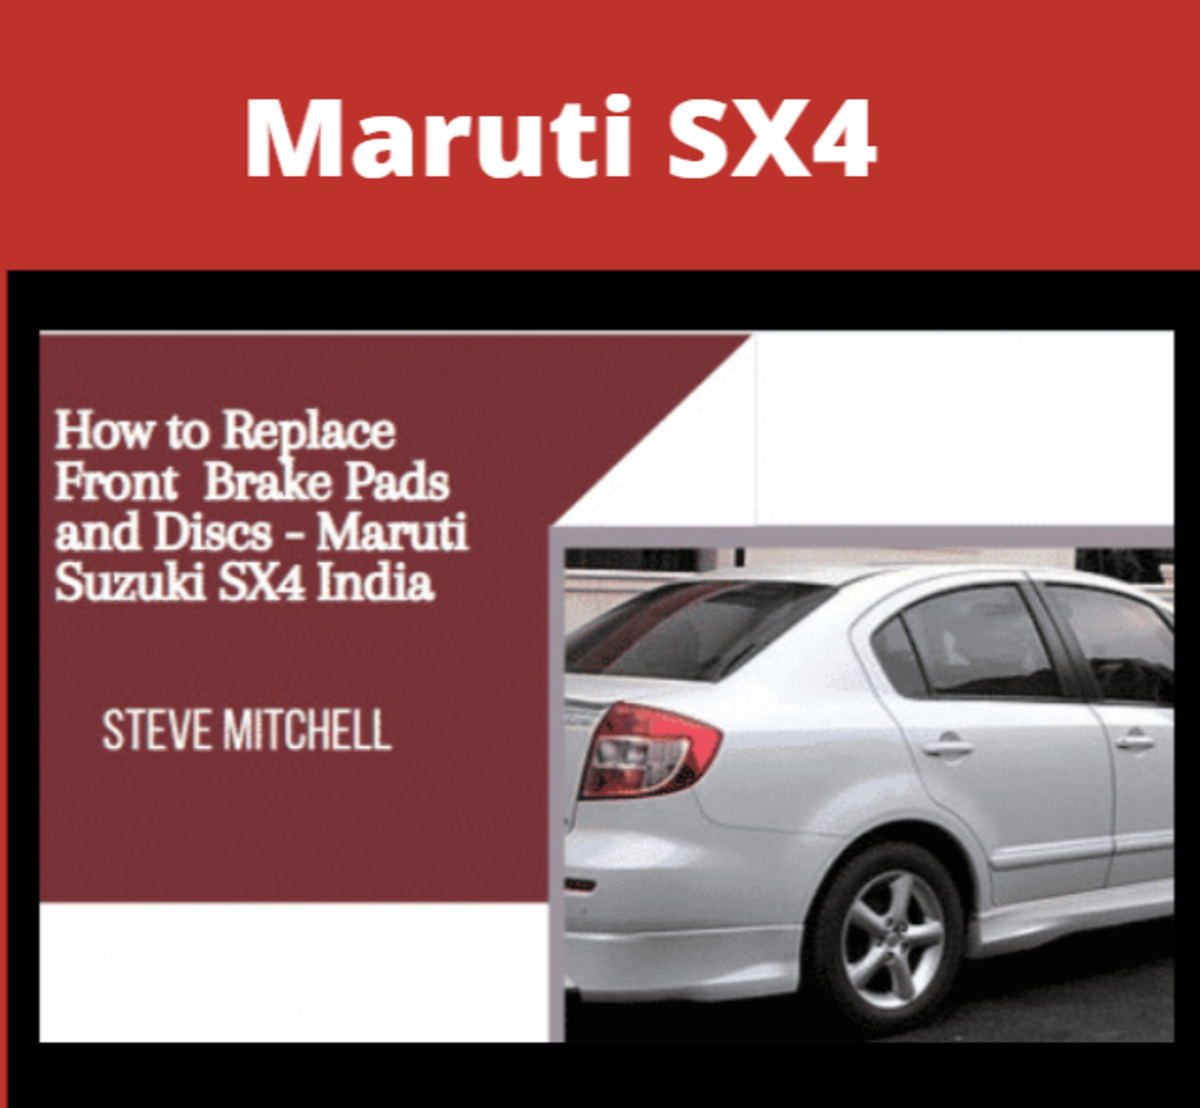 How to Replace Front Brake Pads and Discs: Maruti Suzuki SX4 India